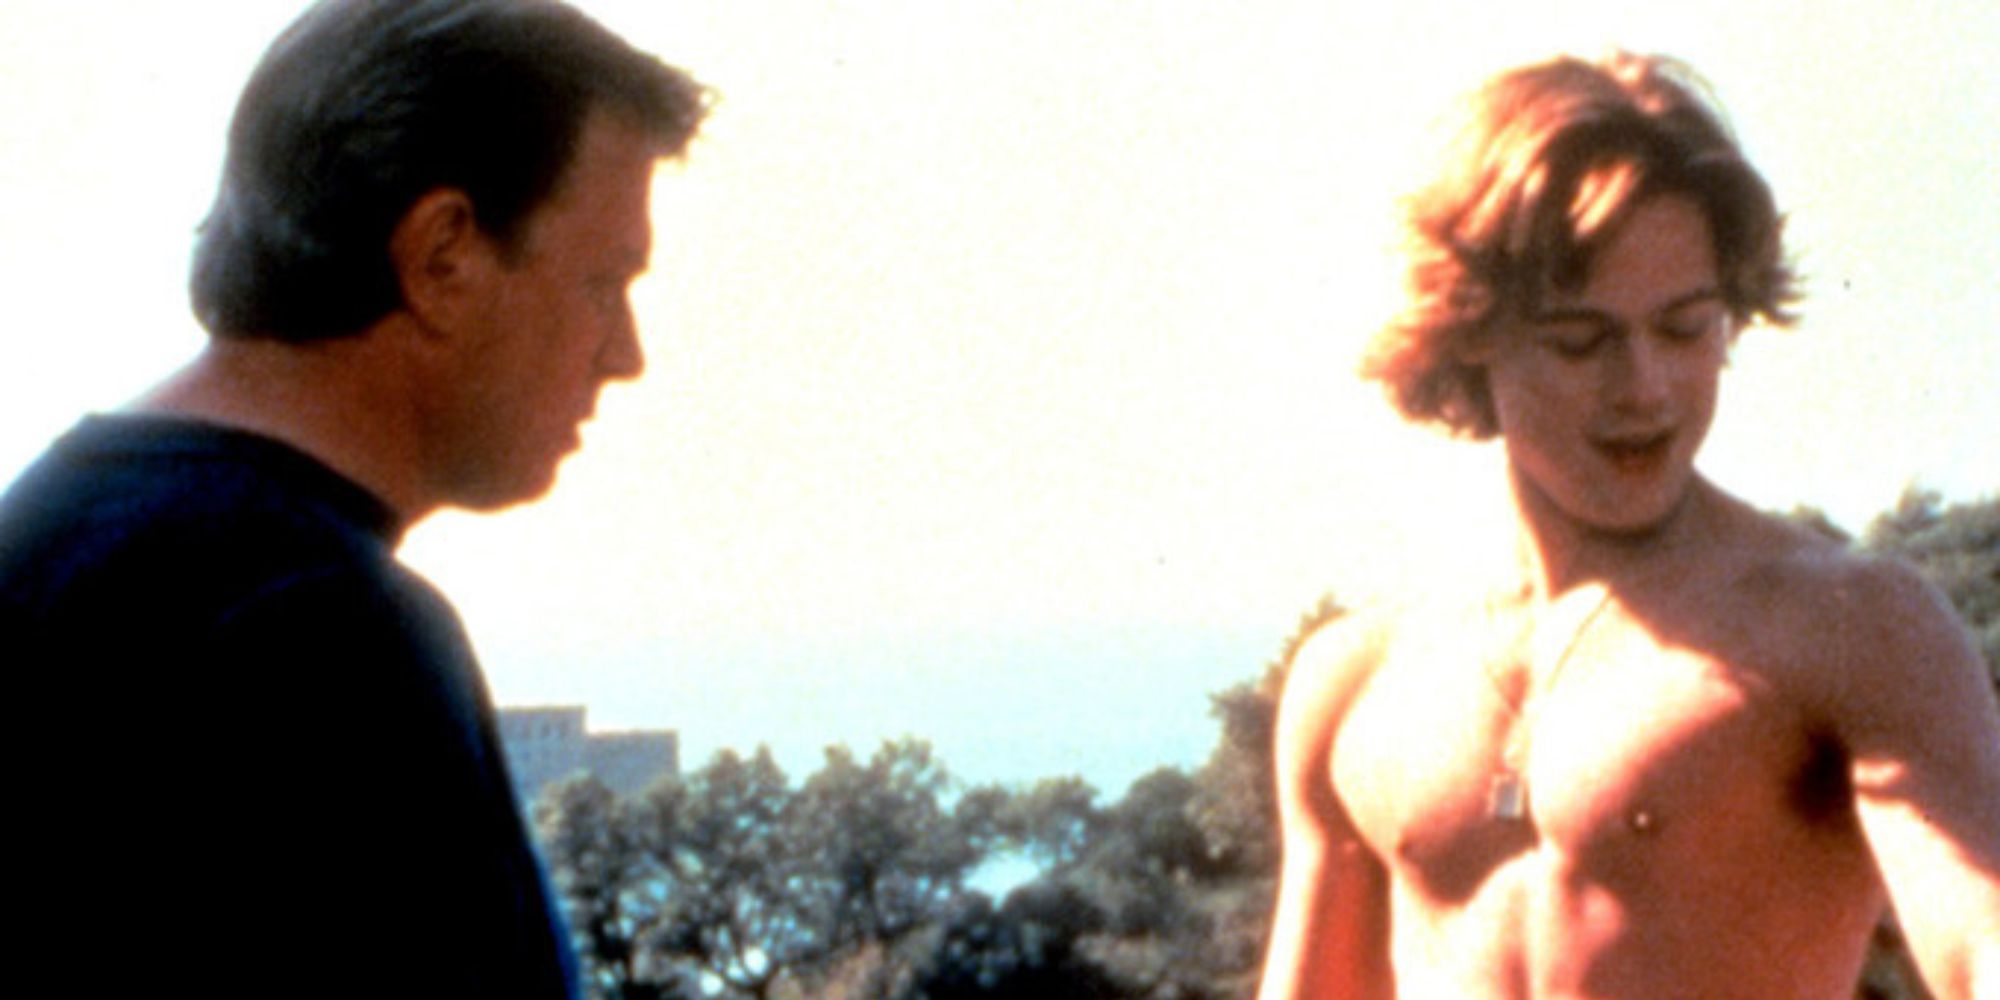 a man is shirtless standing in the sun with another man